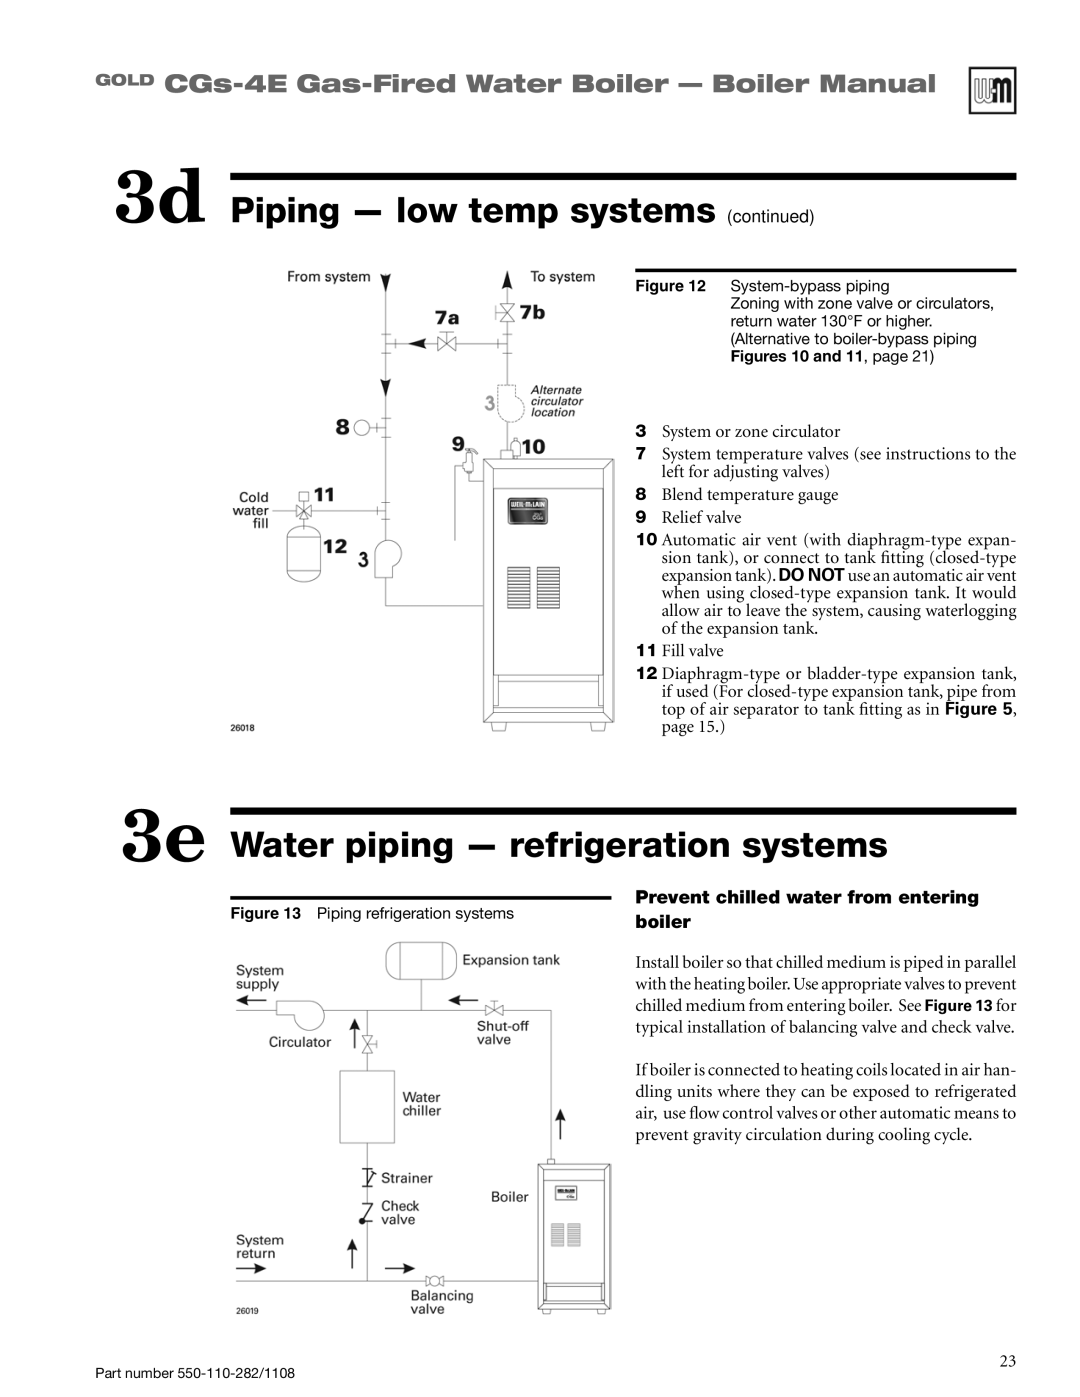 Weil-McLain CGS-4E manual 3e Water piping - refrigeration systems, 3d Piping - low temp systems continued, boiler 